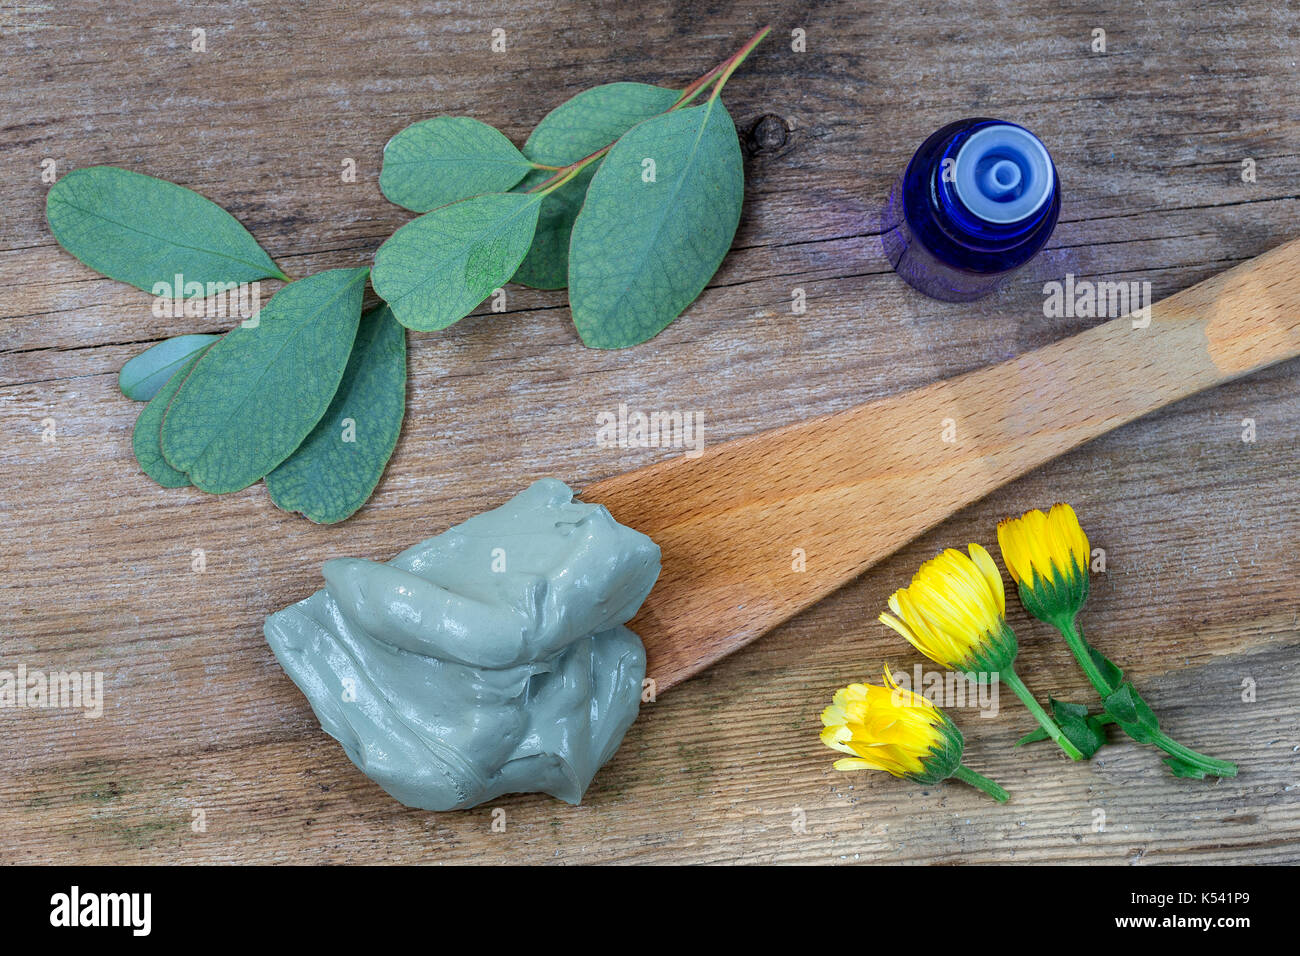 concept of natural cosmetic natural beauty withgreen clay and essentialoiland eucalyptus branch Stock Photo